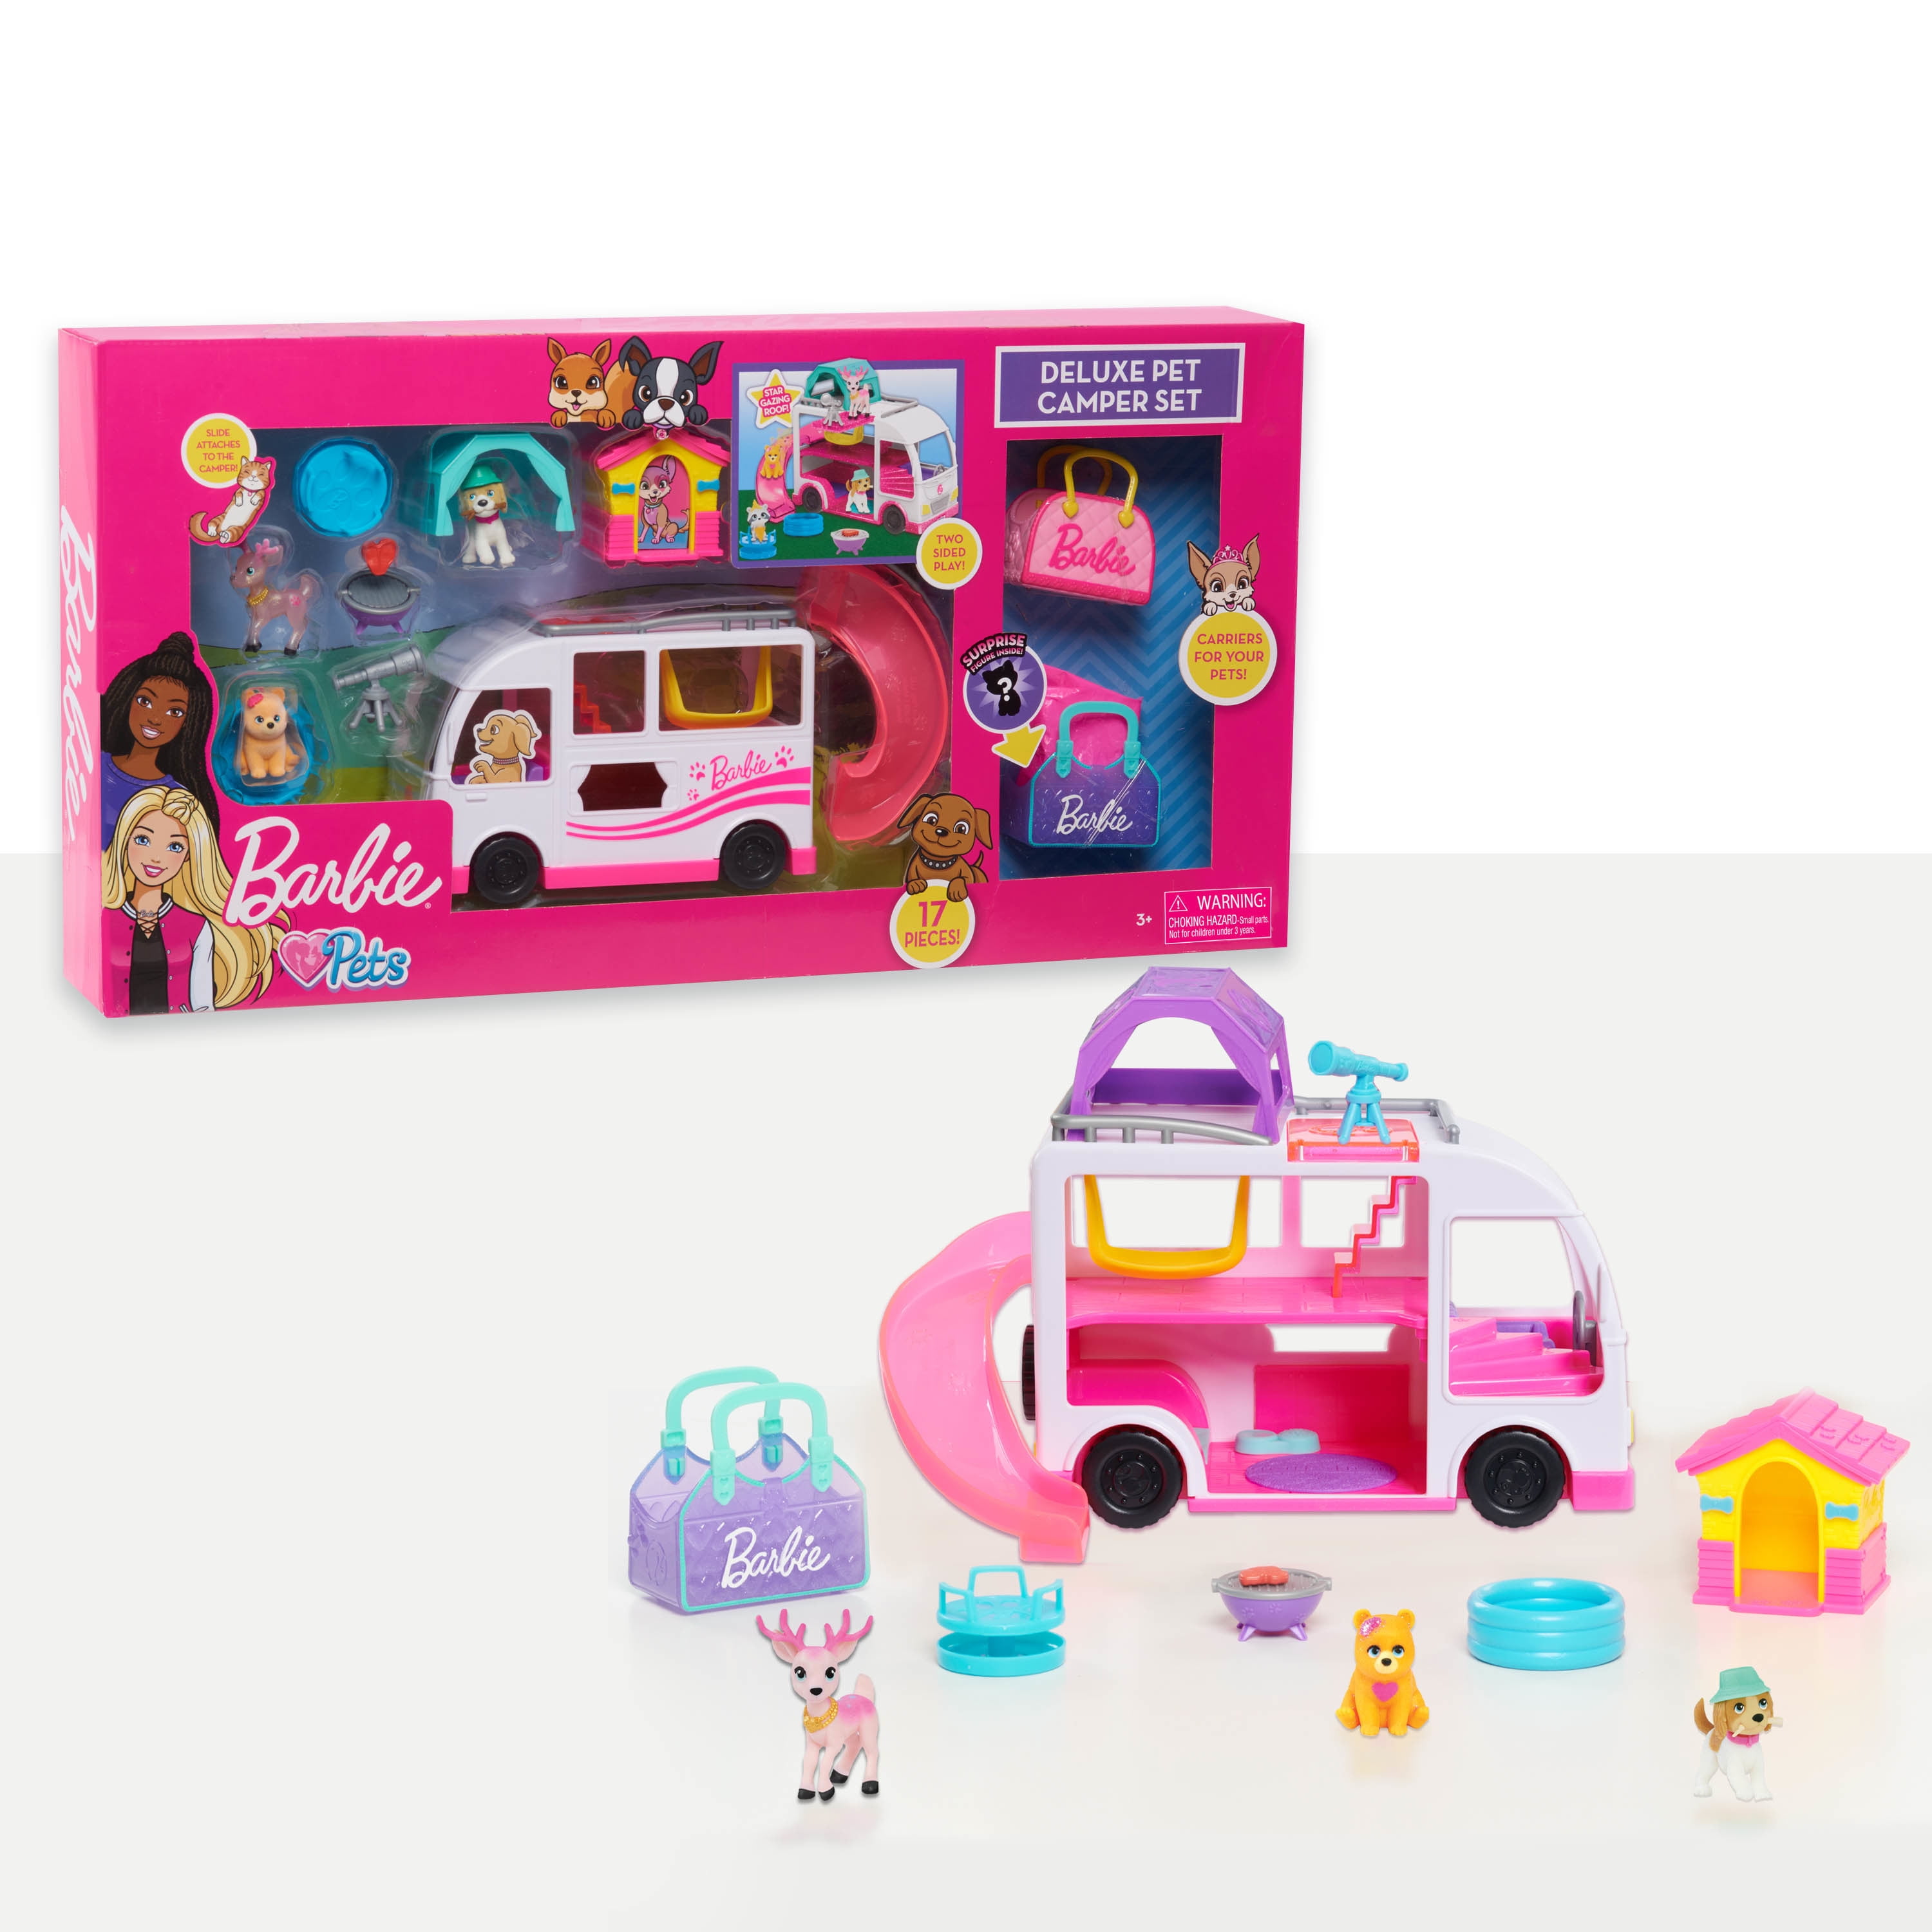 Deluxe Pet Camper Playset with Figures, 17-pieces, Toys for 3 Up, Gifts and Presents Walmart.com